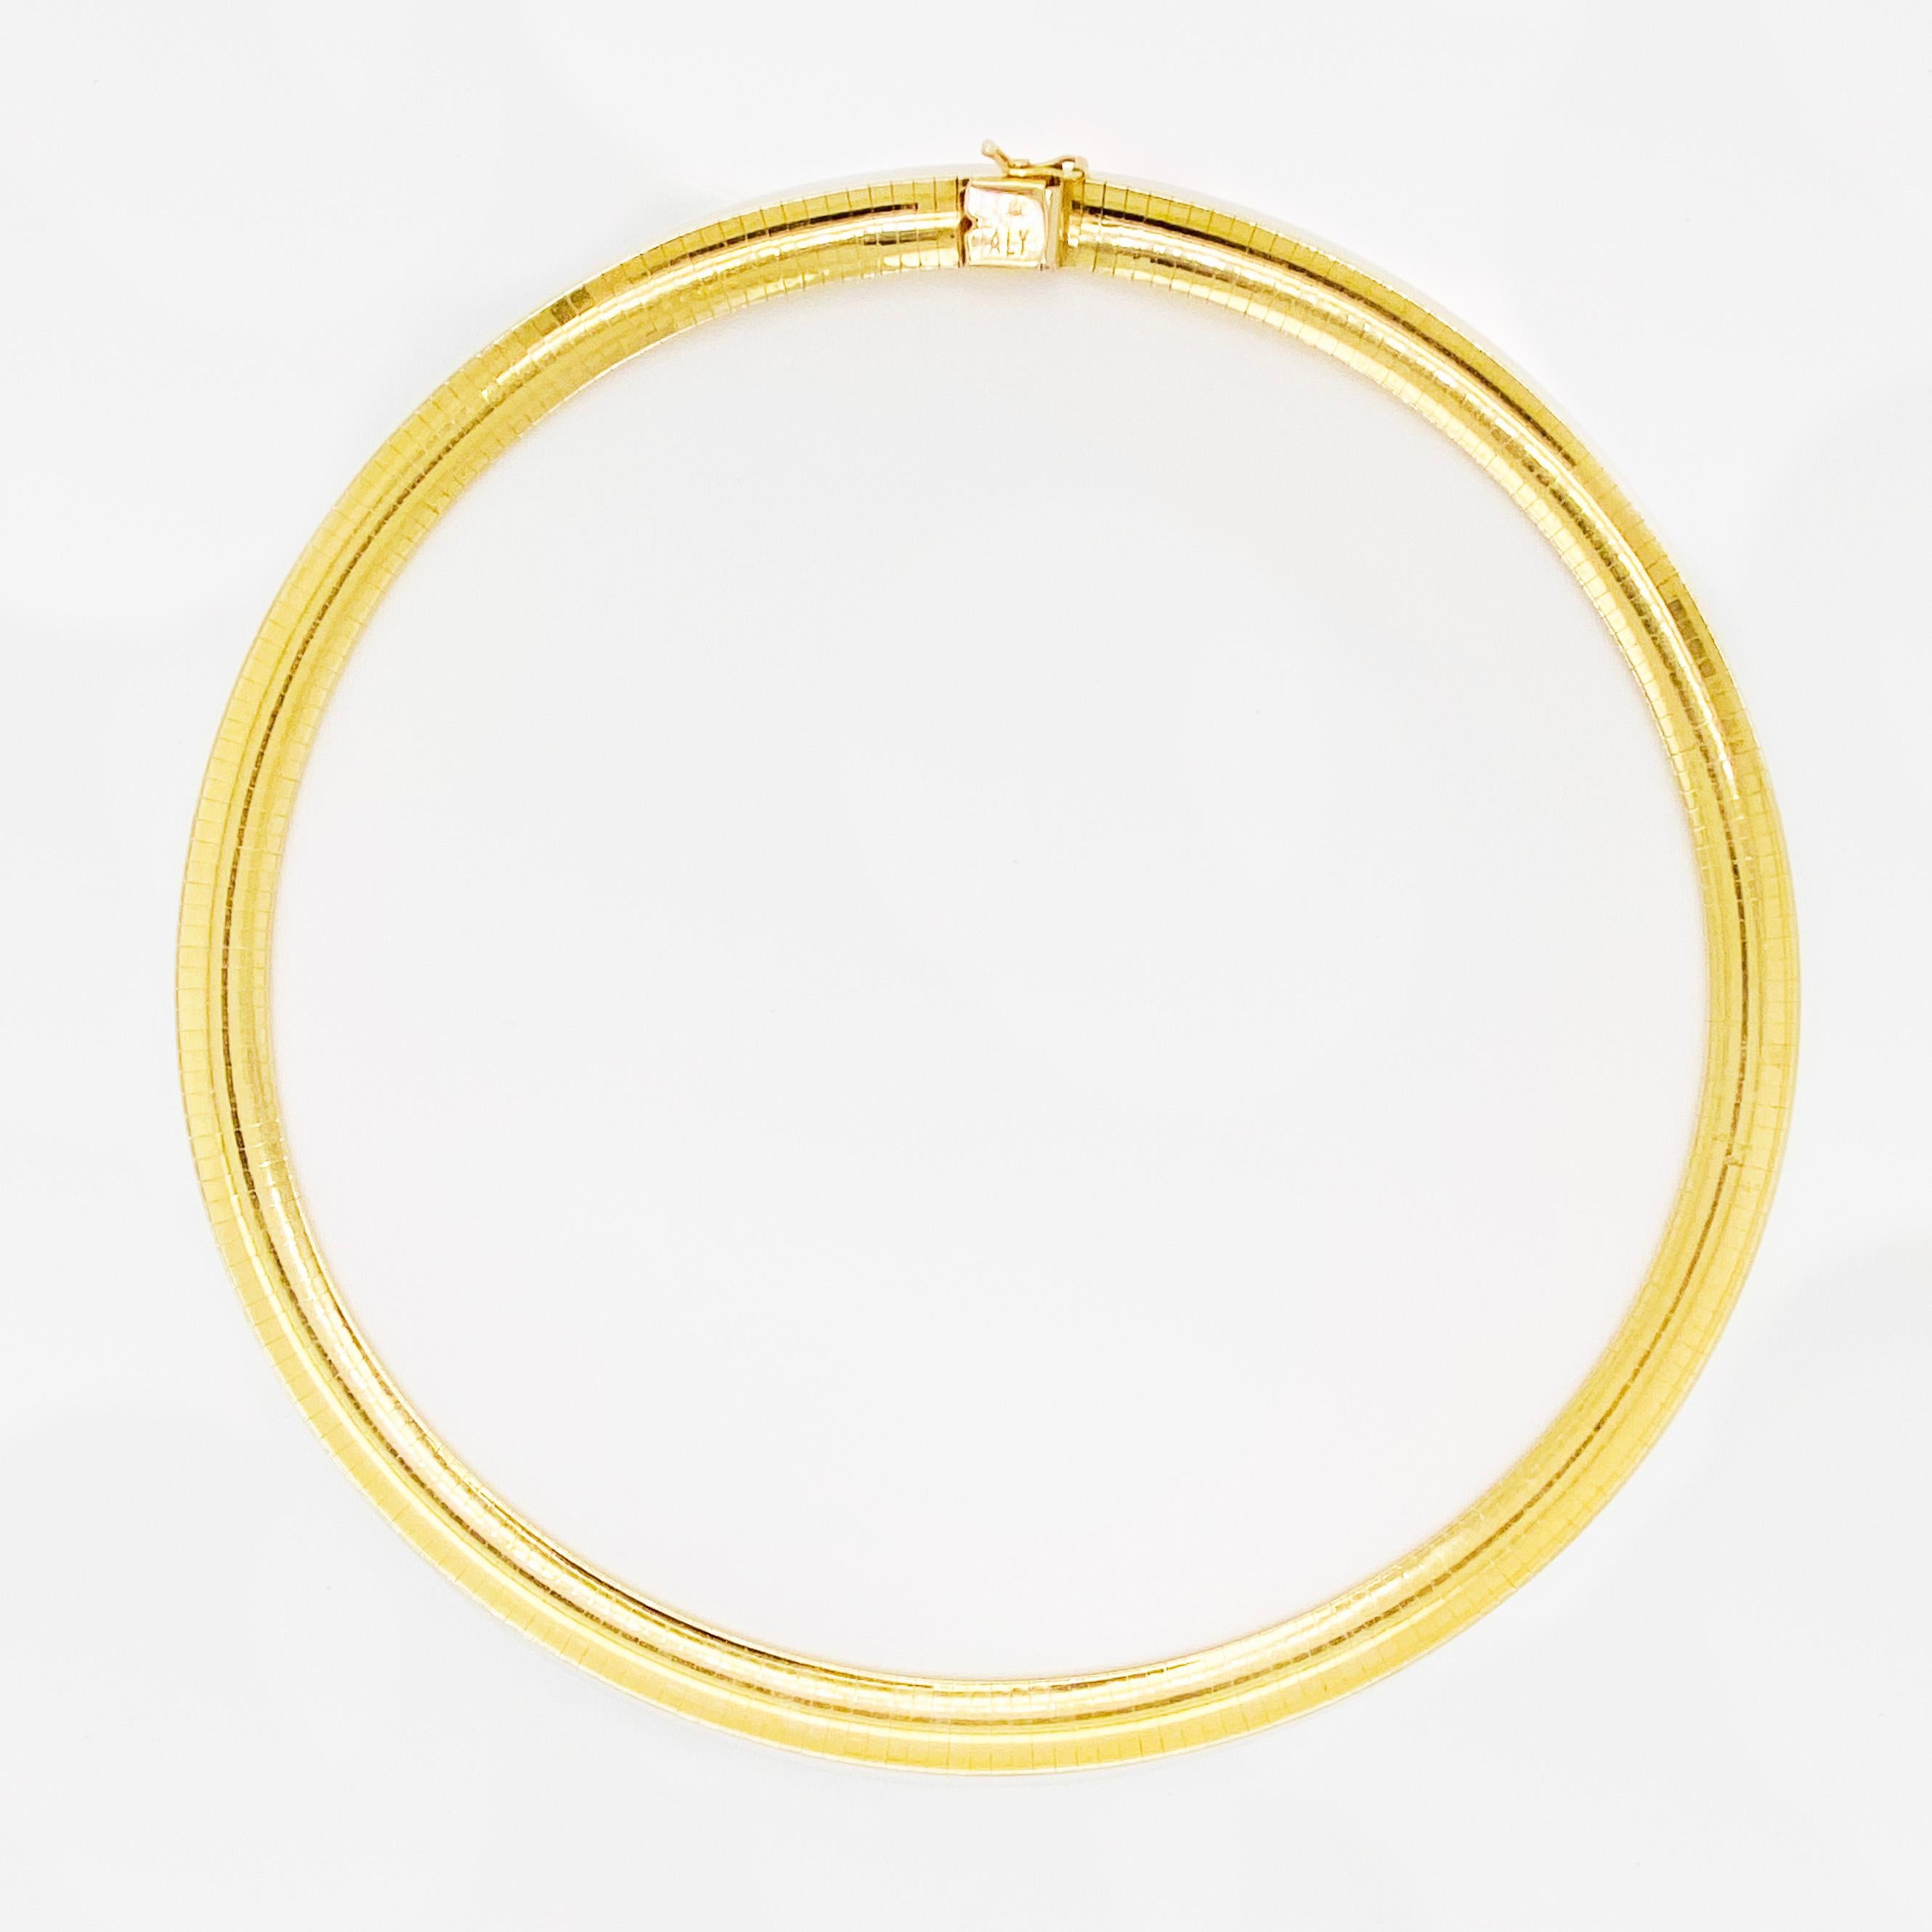 Contemporary Gold Omega Choker Necklace 14 Karat Yellow Gold Omega Necklace